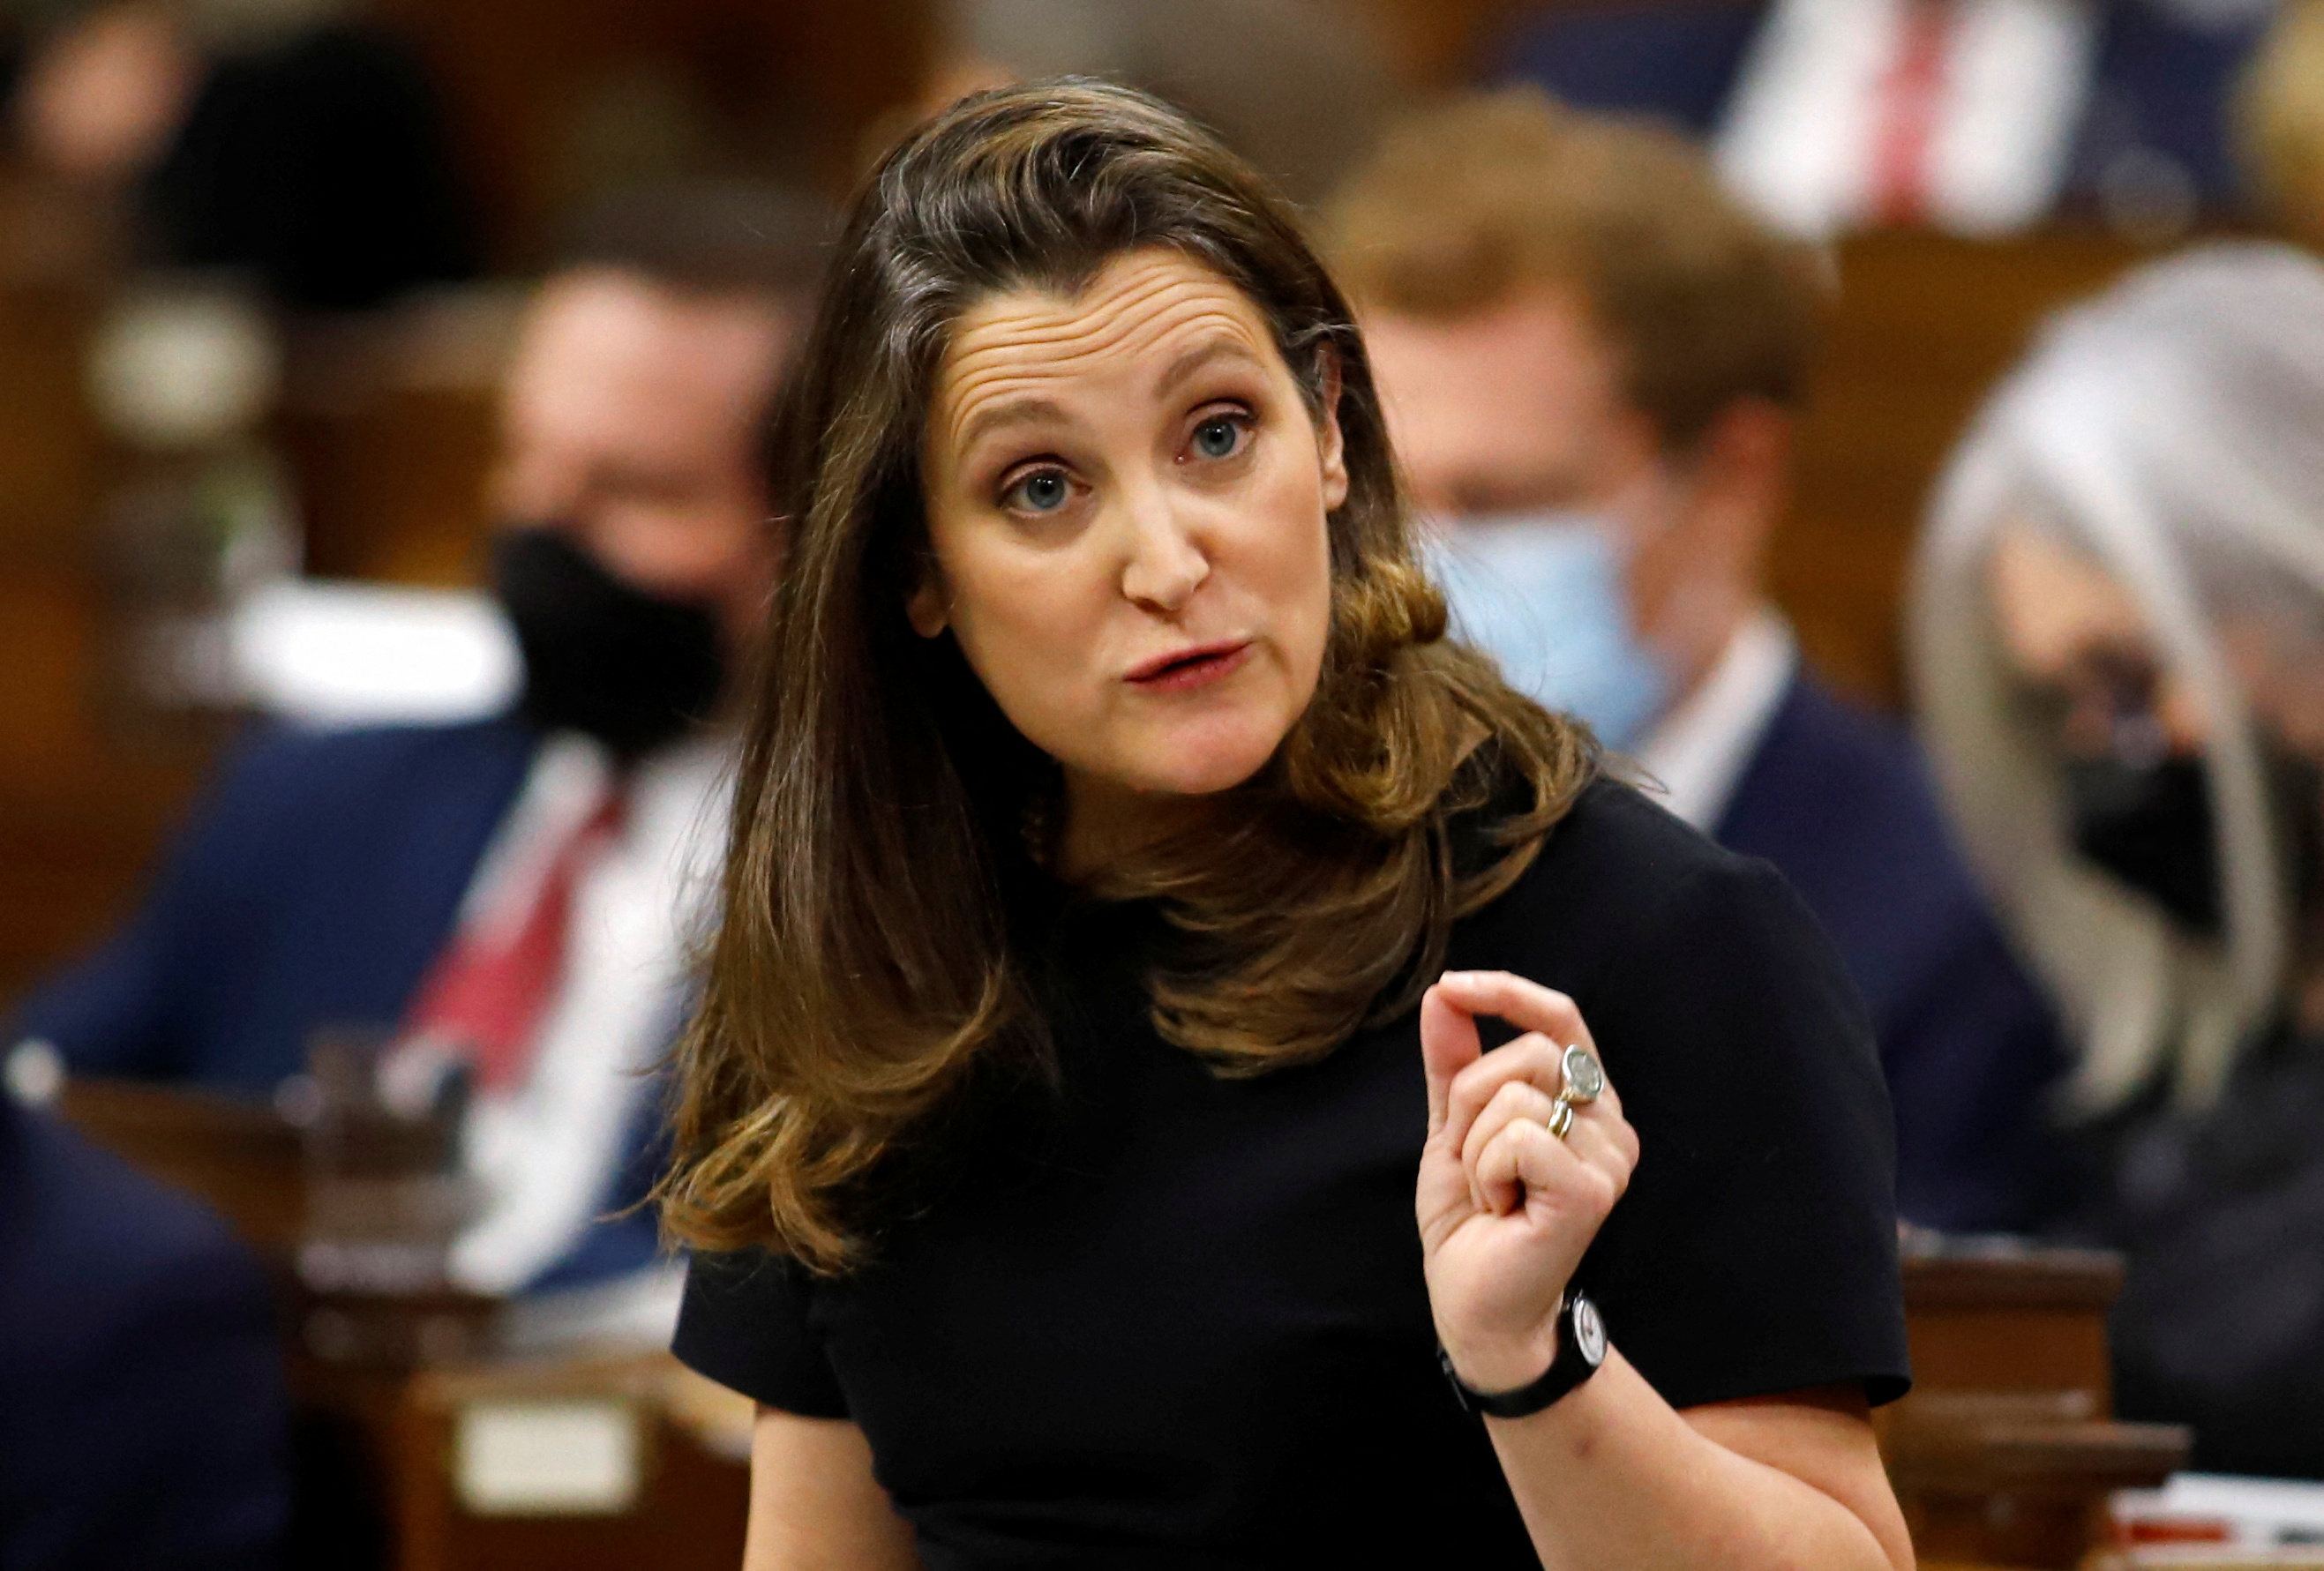 Canada's Deputy Prime Minister and Minister of Finance Chrystia Freeland speaks during Question Period in the House of Commons on Parliament Hill in Ottawa